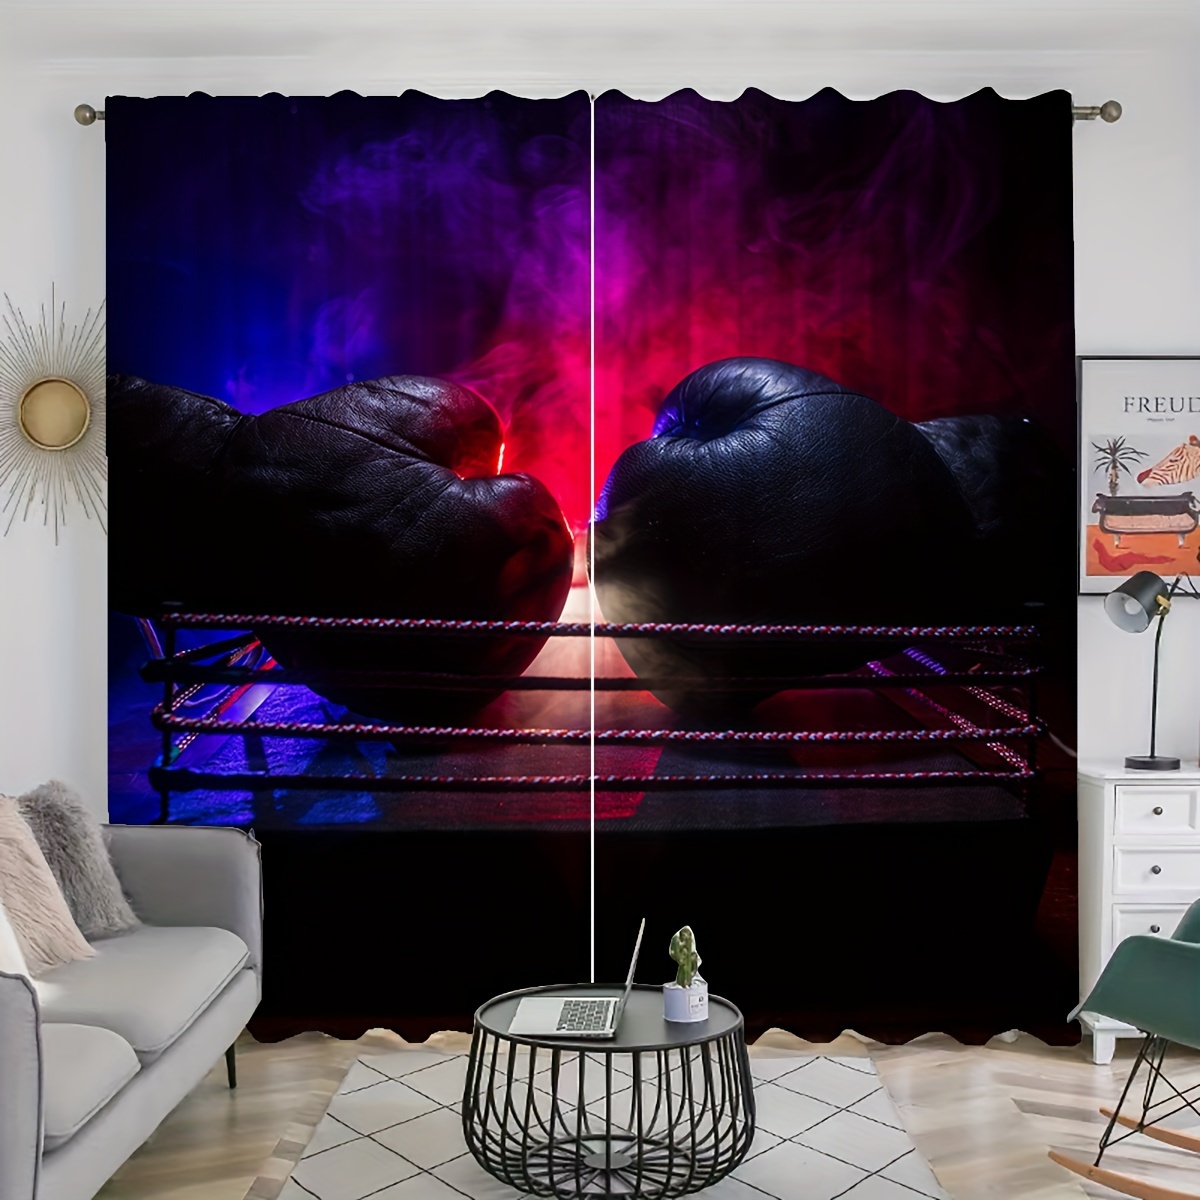 

Boxing Ring Pattern Printed Curtains, Set Of 2, Rod Pocket, Sports Theme, Semi-sheer Drapes For Living Room, Bedroom, Office, Polyester, Machine Washable, All-season Decorative Panels